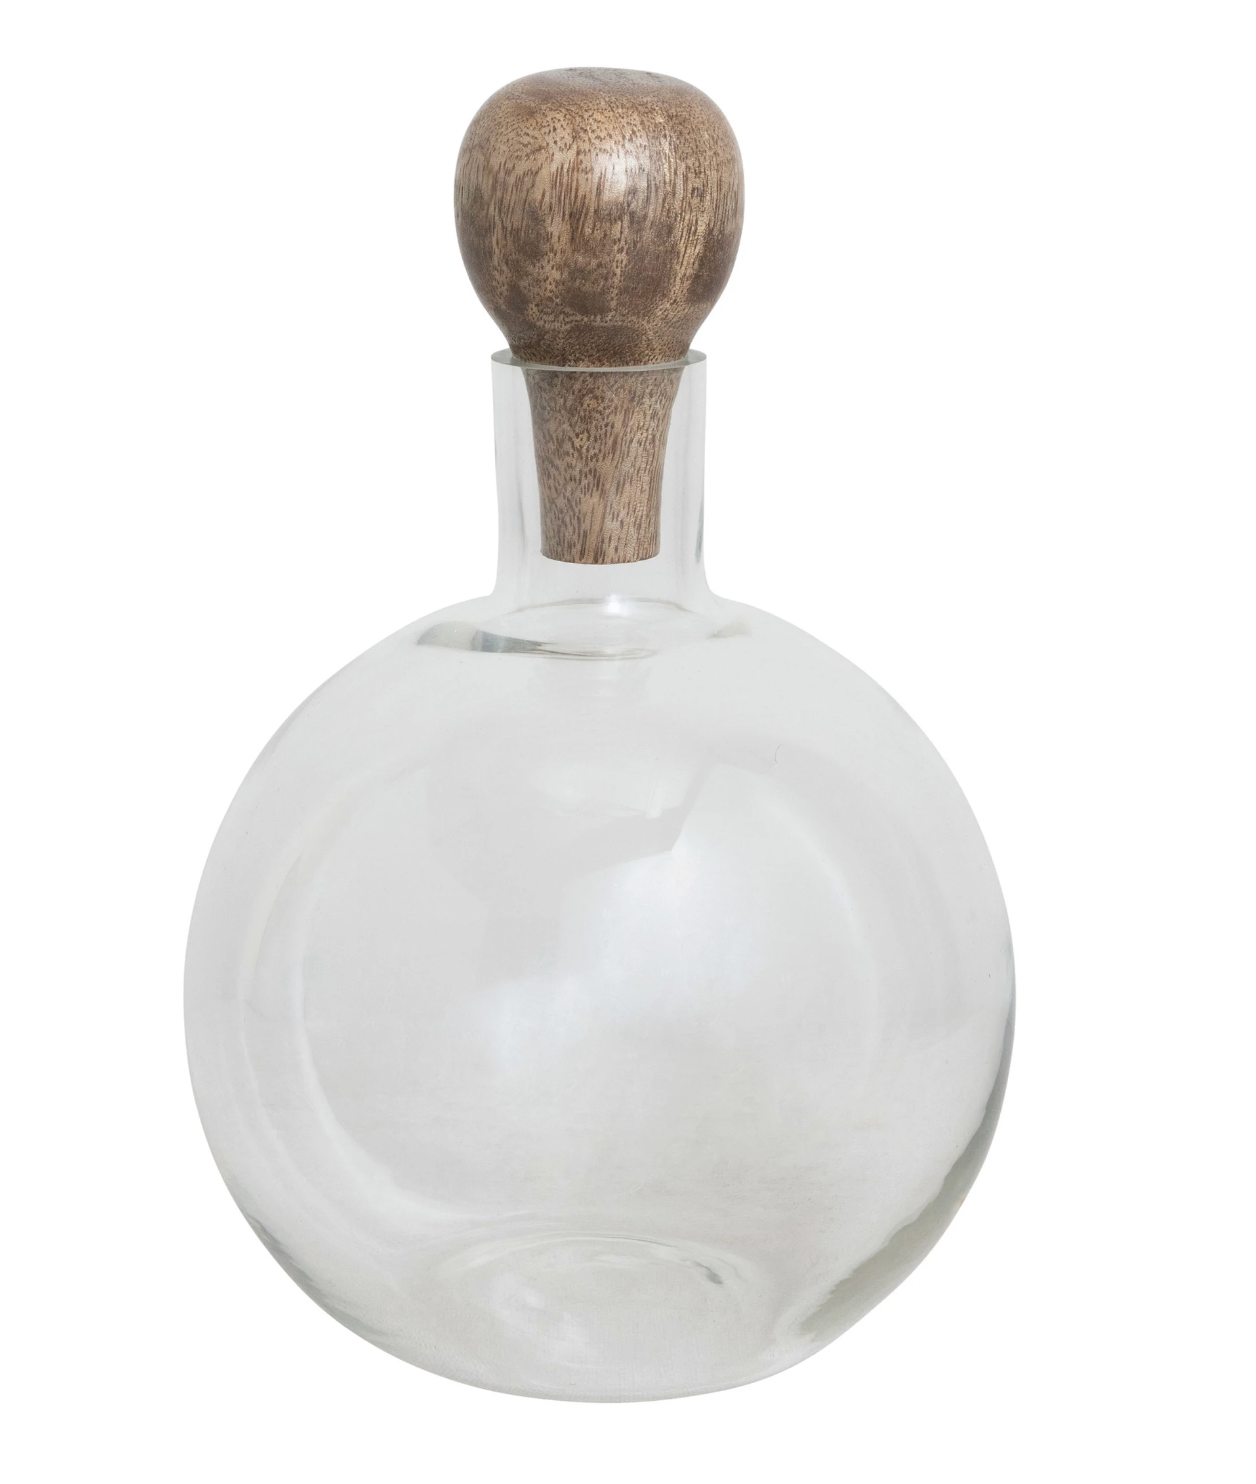 Glass Decanter with Mango Wood Stopper